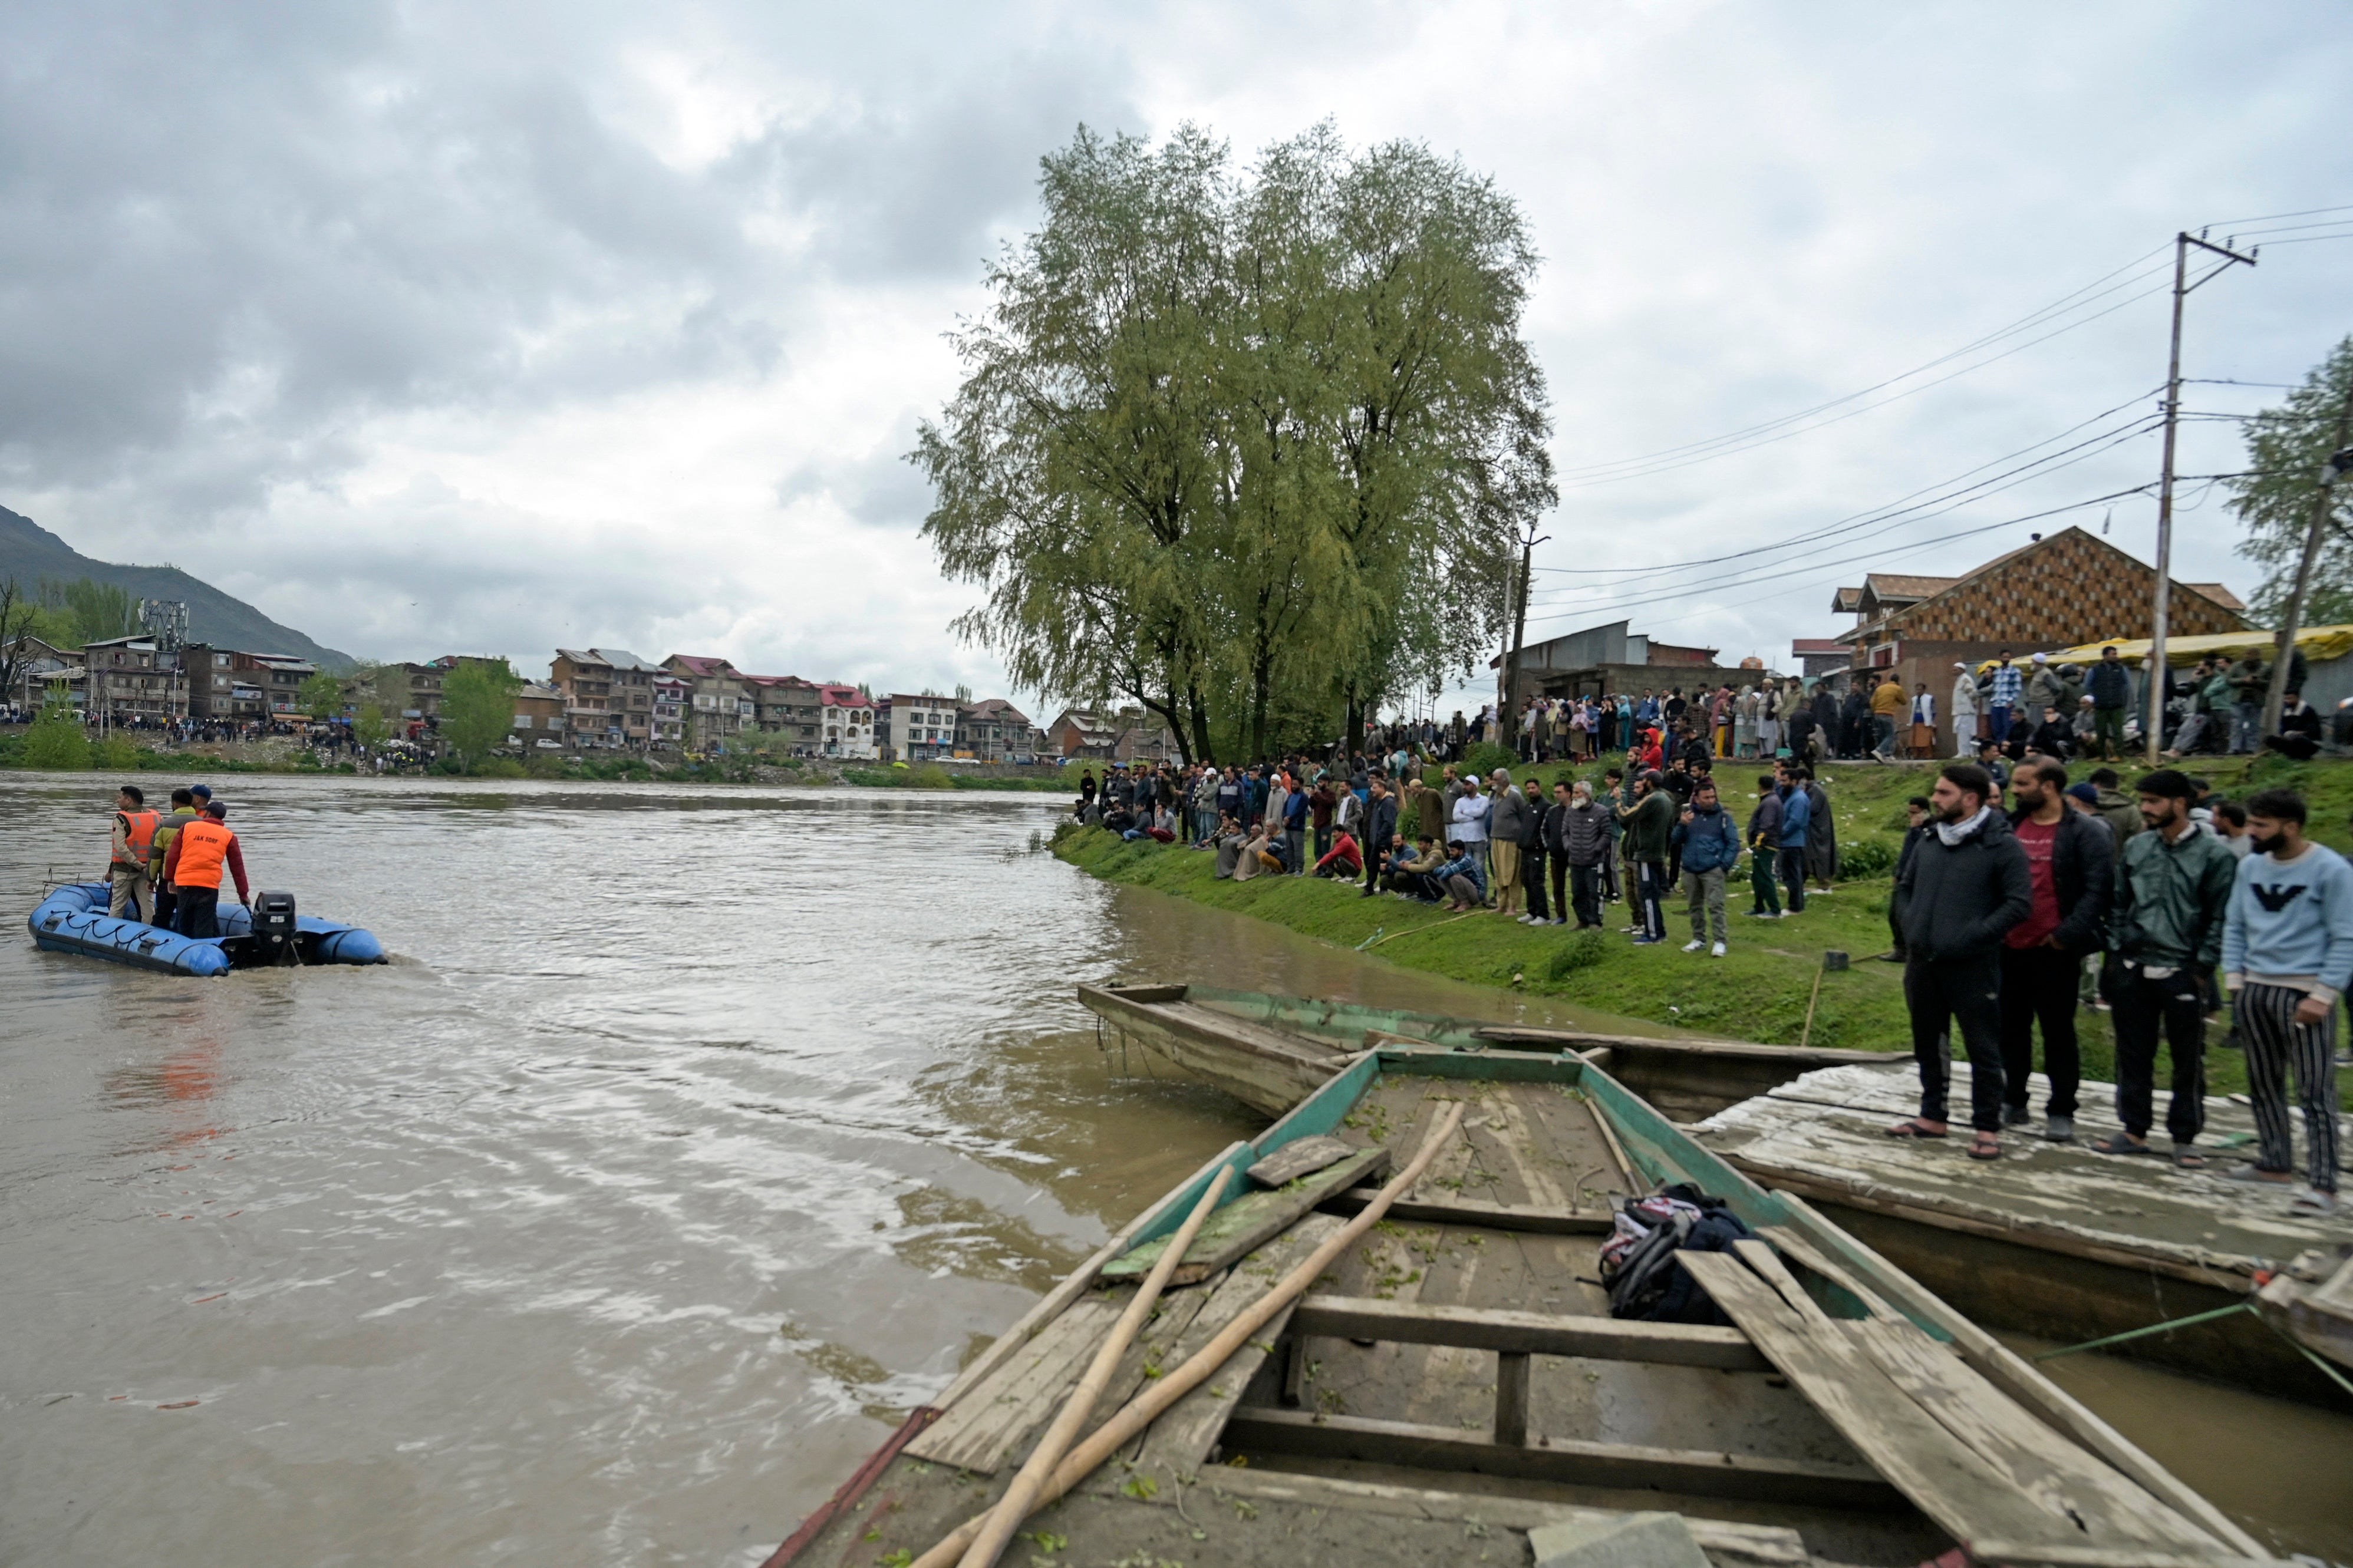 People gather along the bank of the Jhelum river as National Disaster Response Force (NDRF) personnel (L) conduct a rescue and search operation after a boat ferrying people capsized in Srinagar